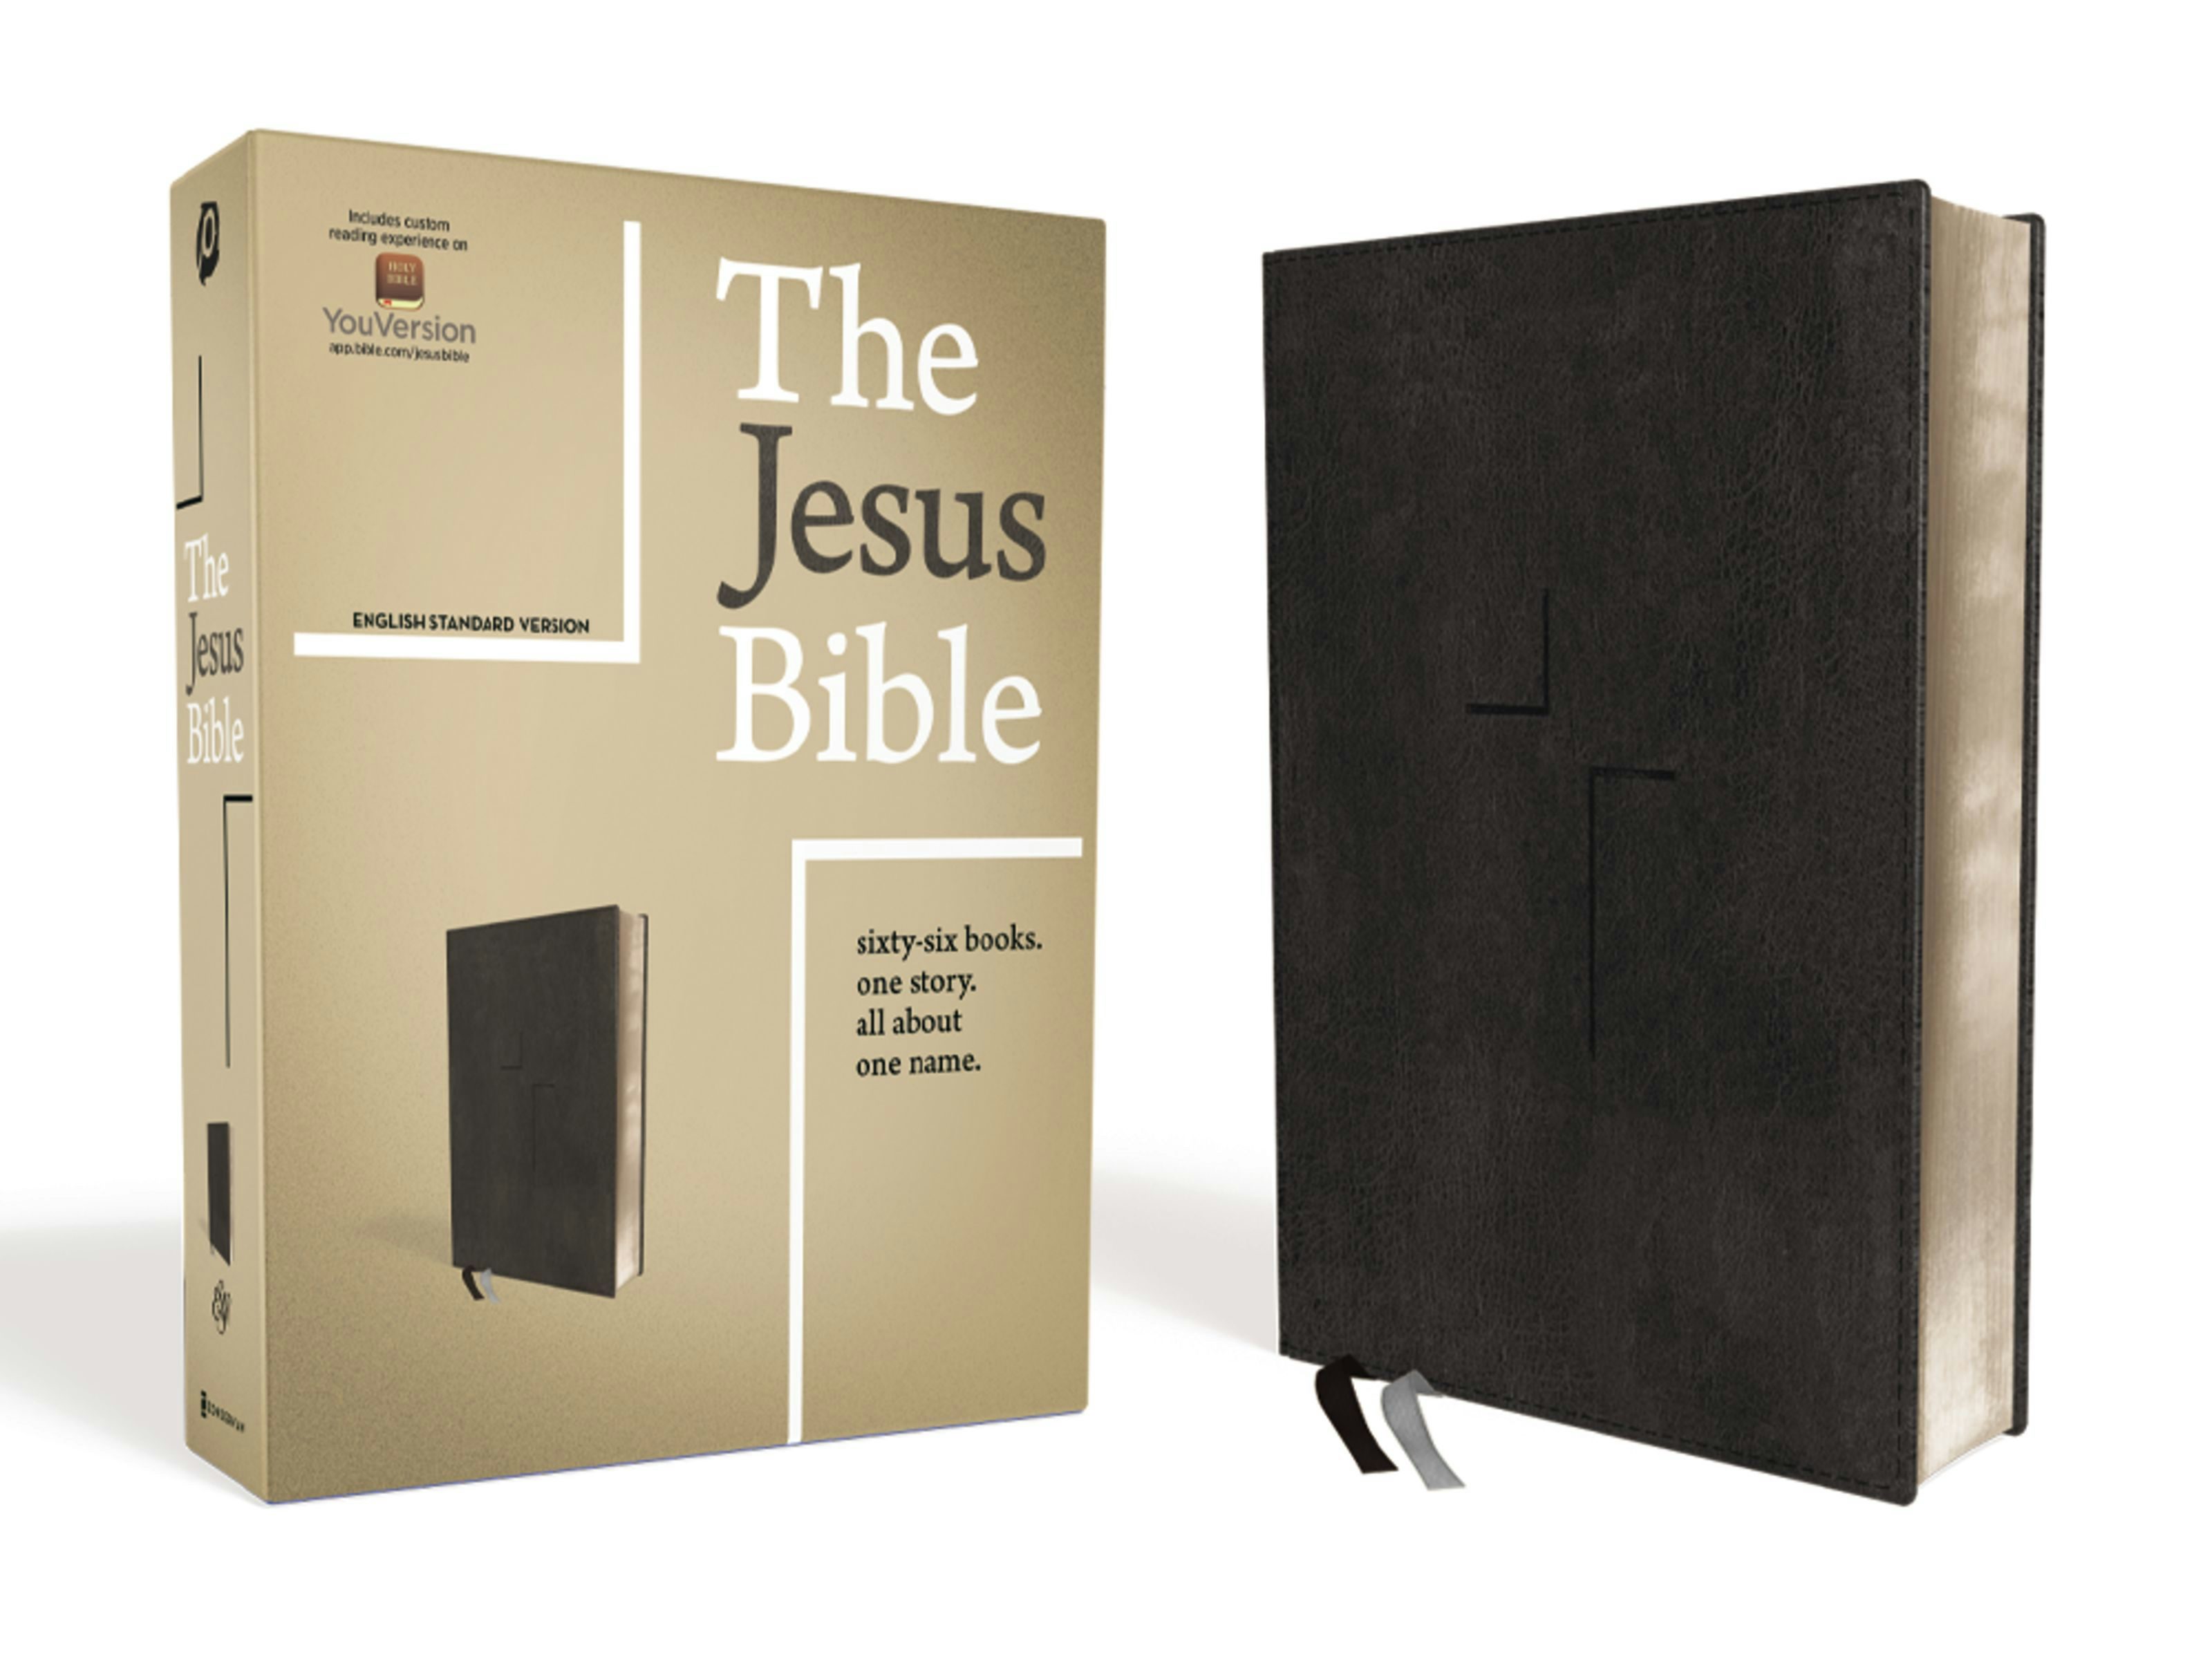 esv bible with thumb index